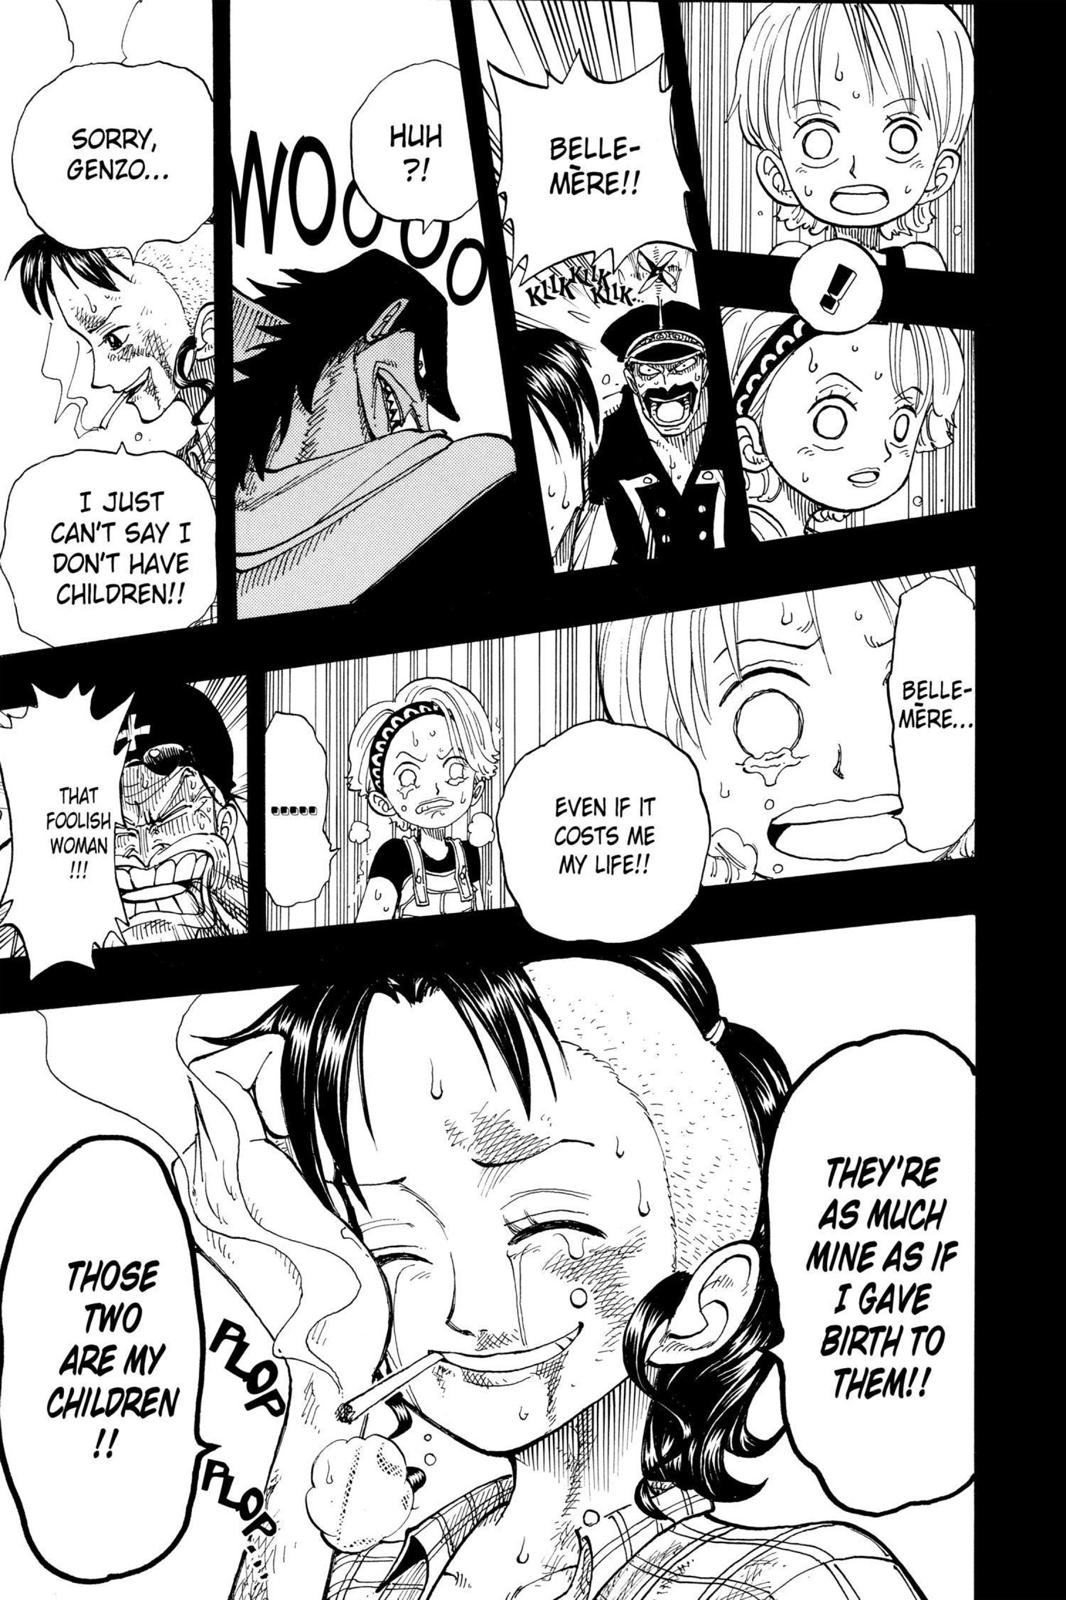 Nami learned not to lie even when facing death from her mother : r